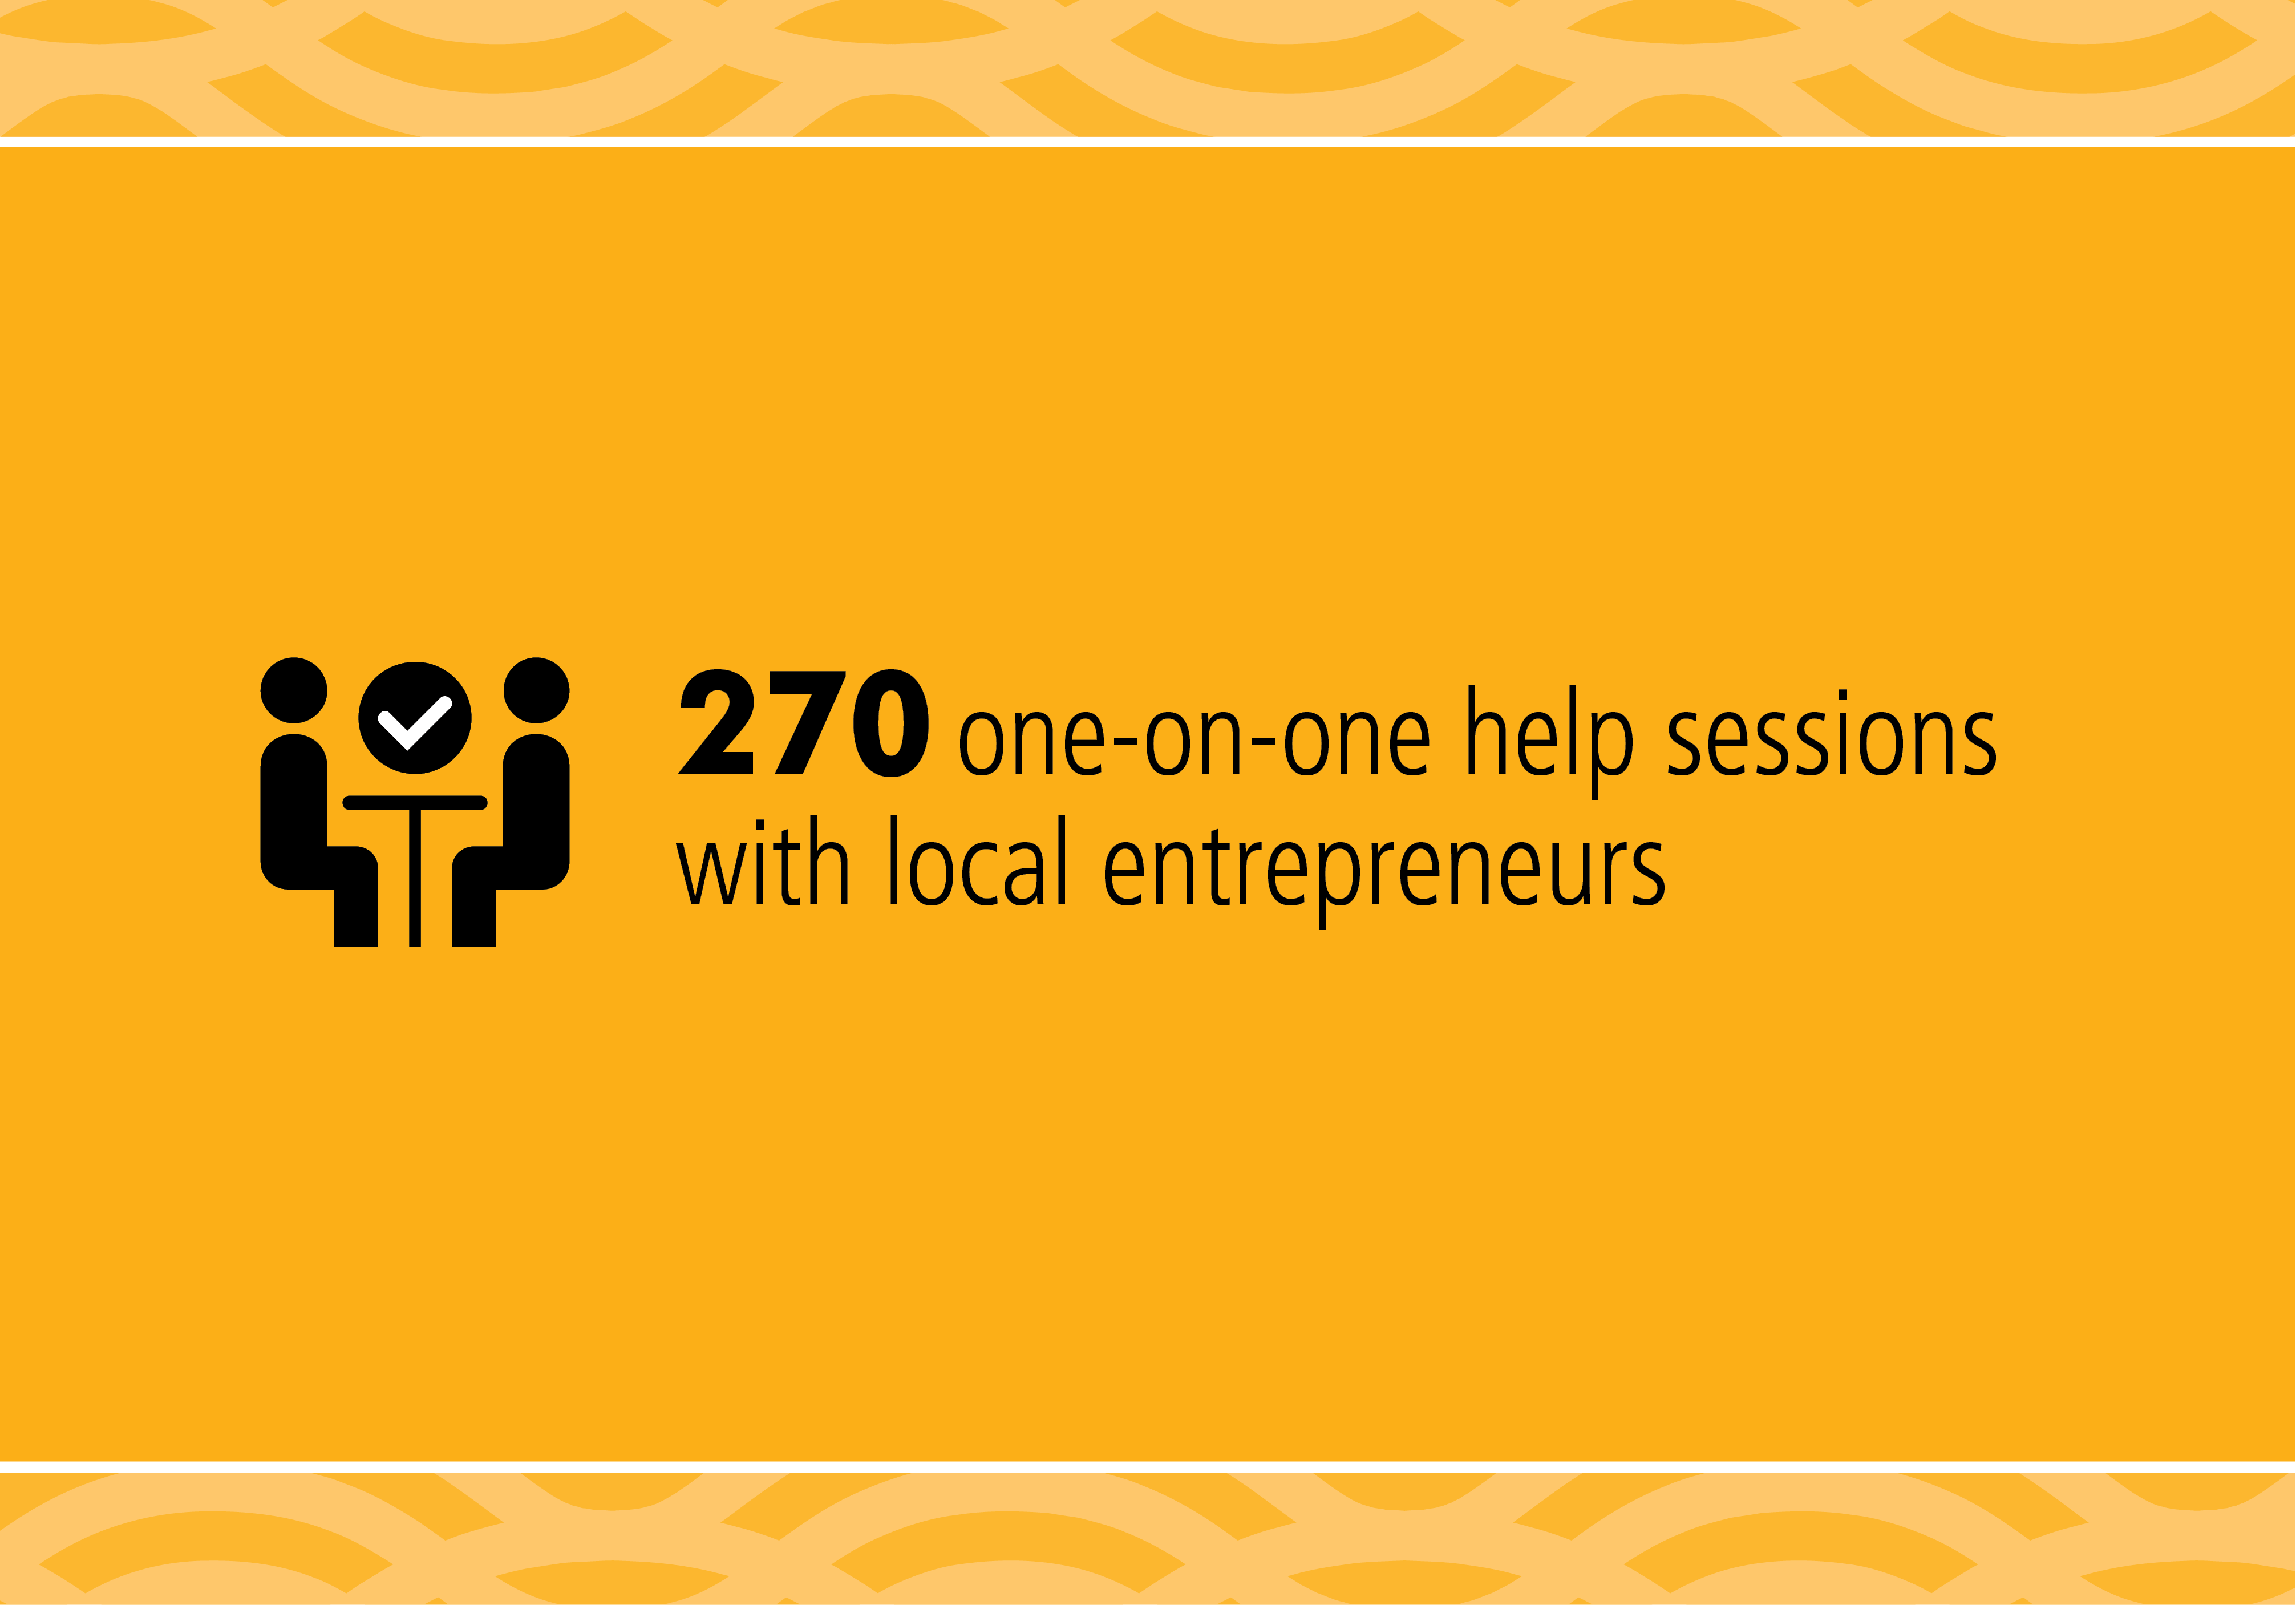 270 one-on-one help sessions with local entrepreneurs